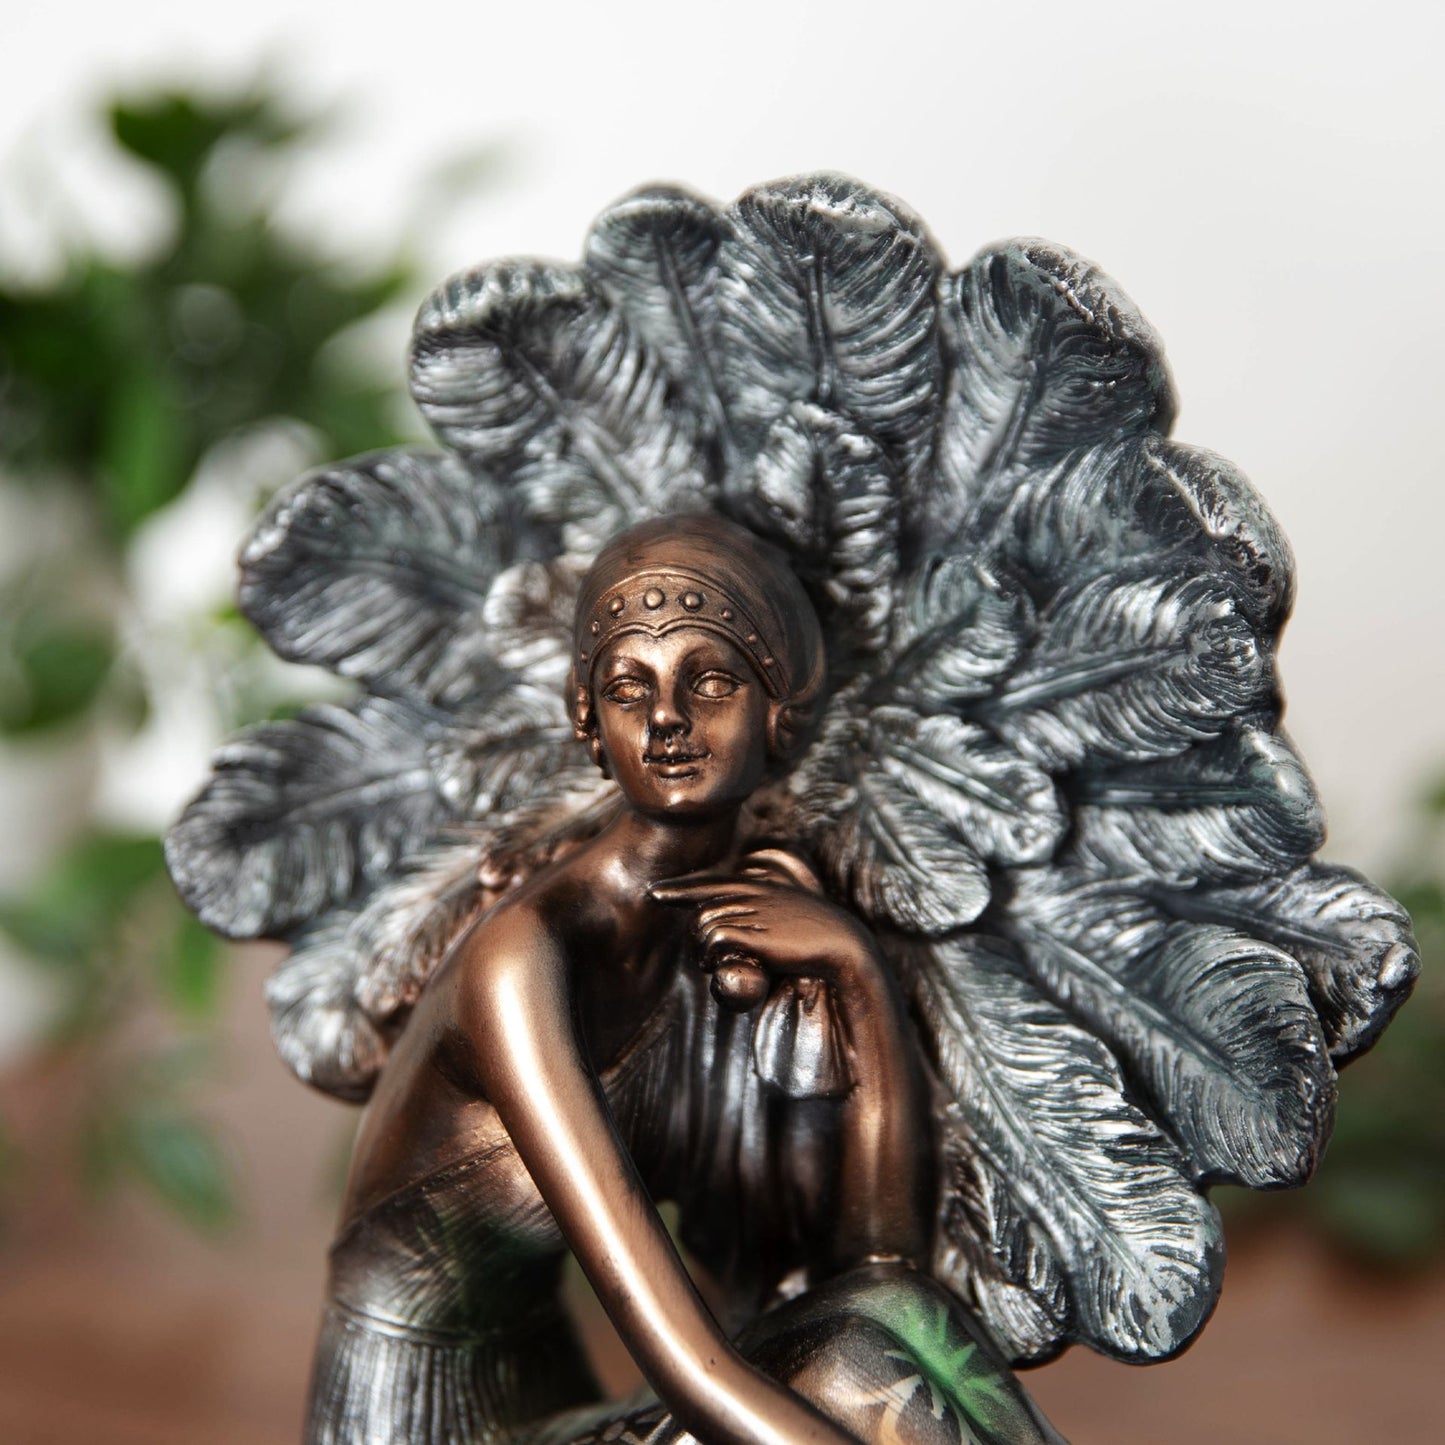 Silhouette Collection Lady Figurine Bronze & Green- Sitting with Peacock Feather- 21 x 20.5 x 9.5cm